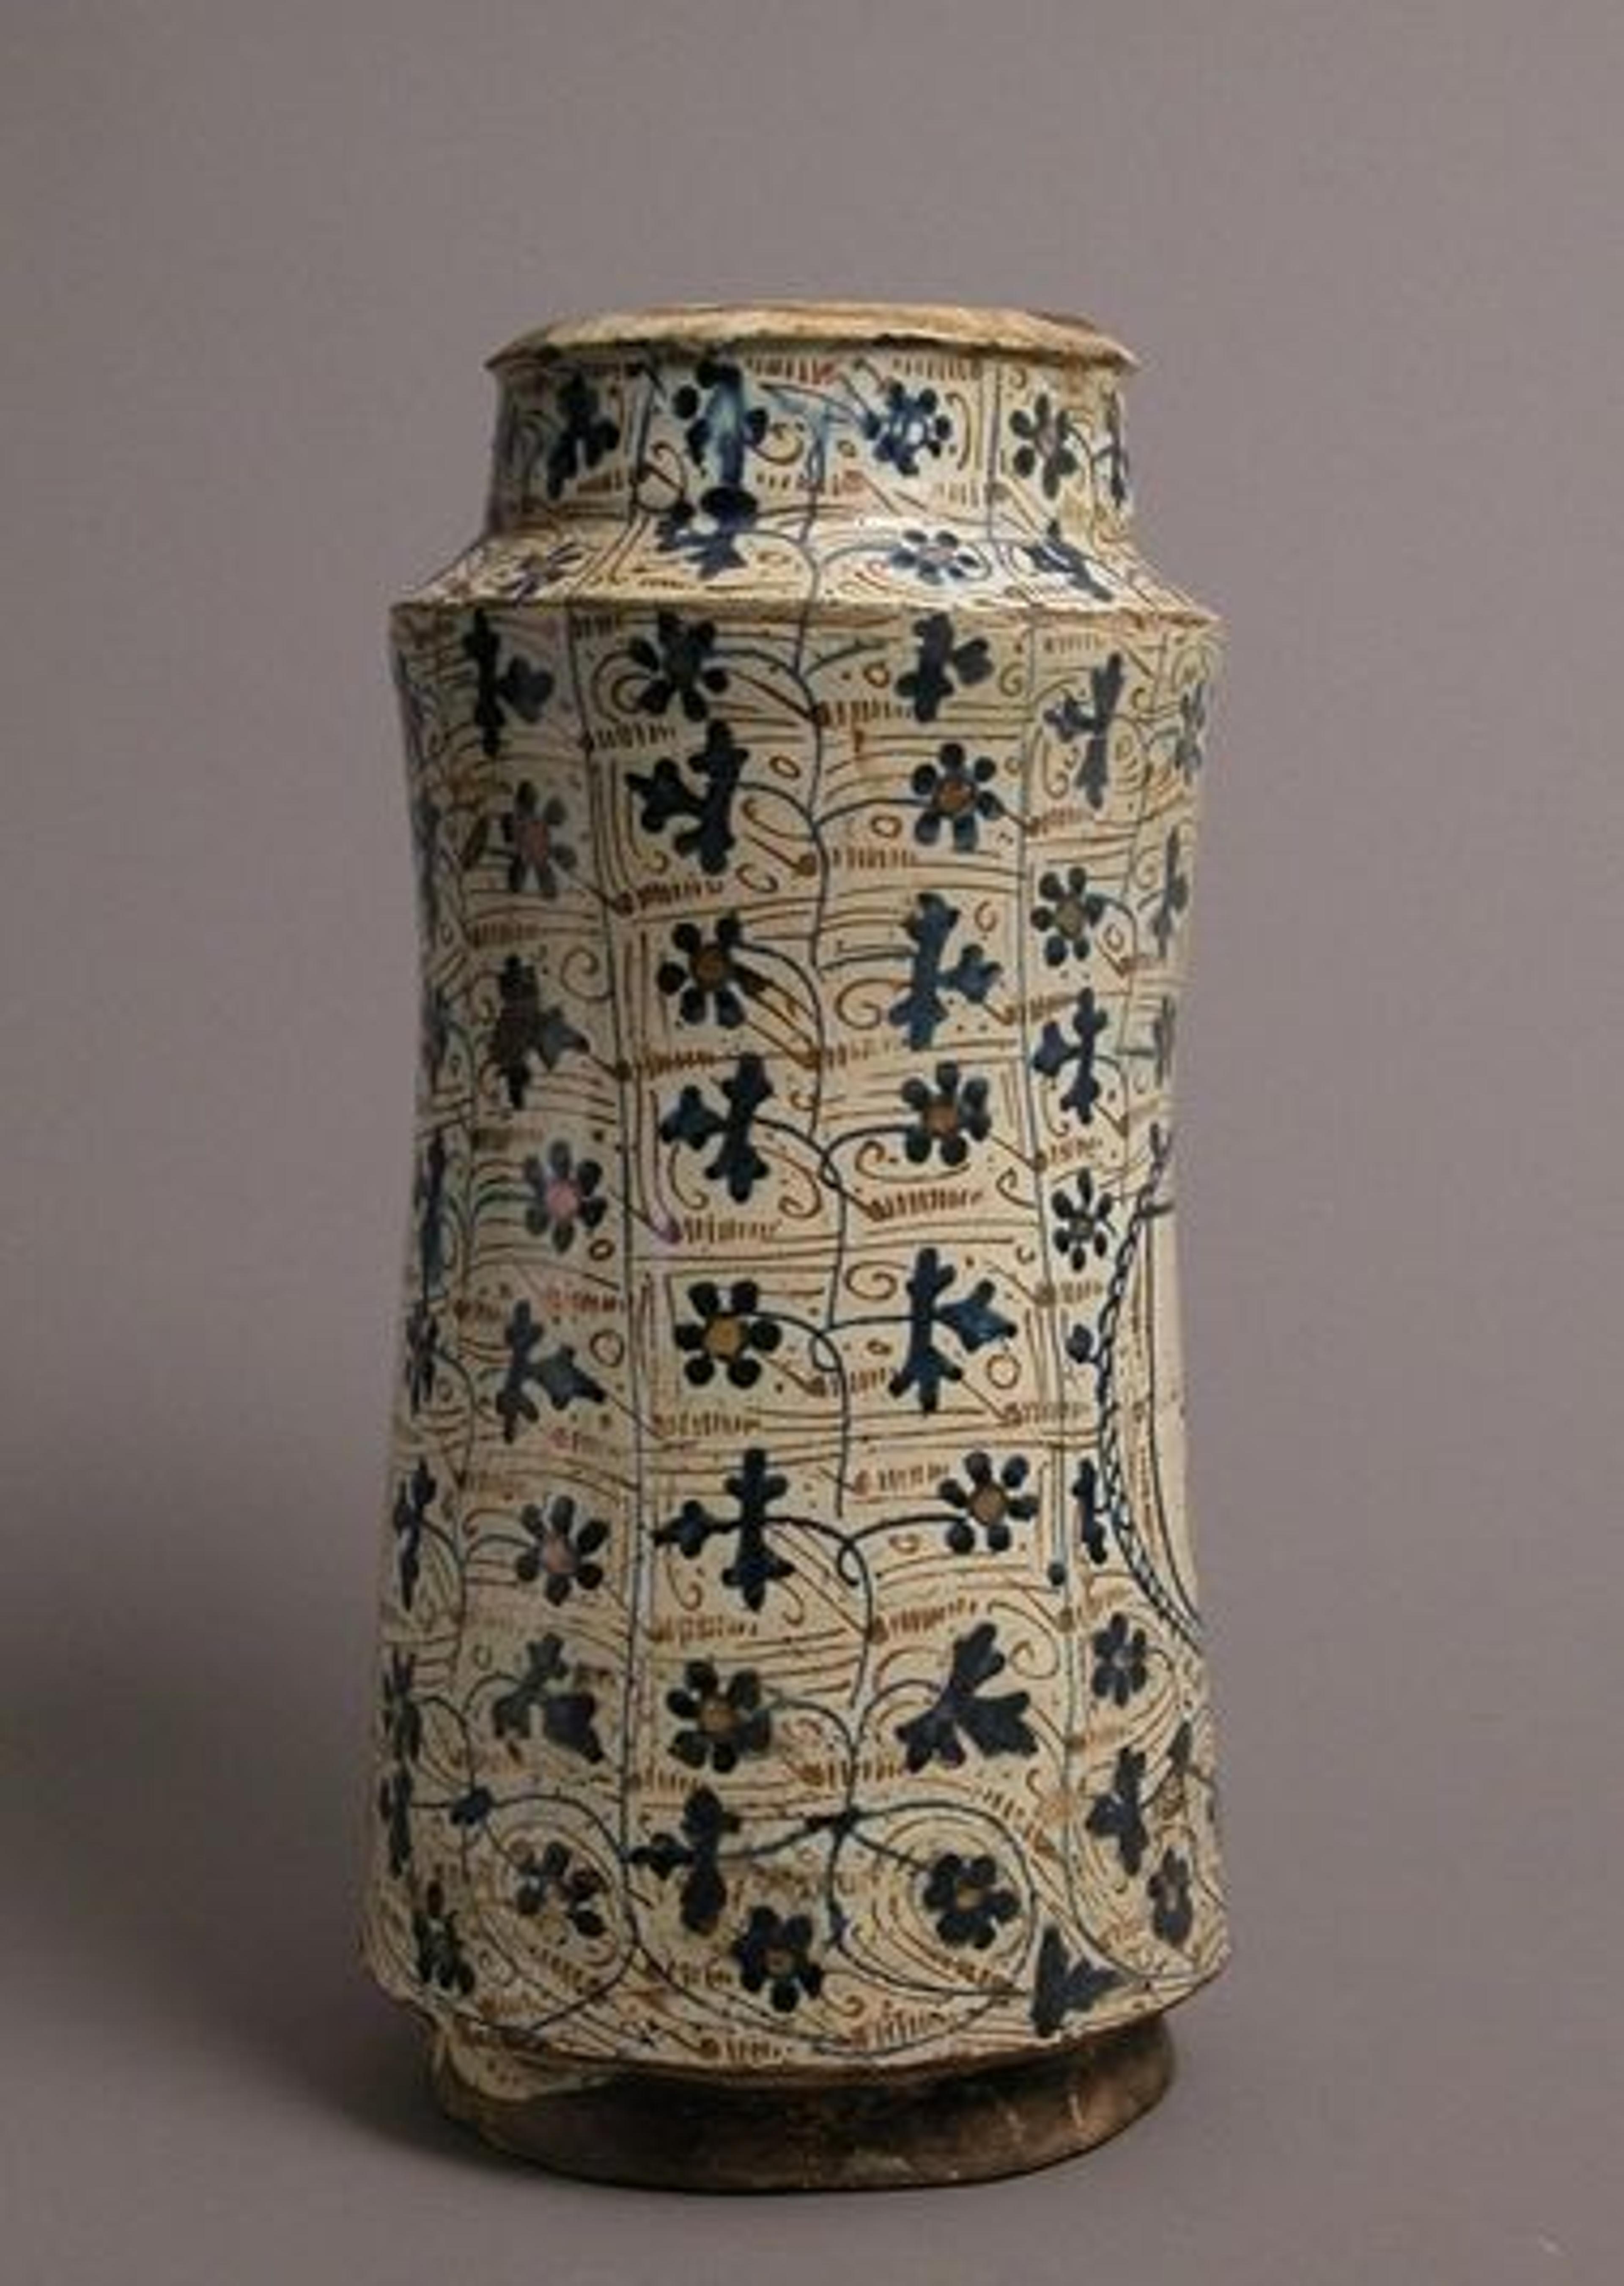 A lusterware albarello or pharmacy jar patterned with stylized bryony vines